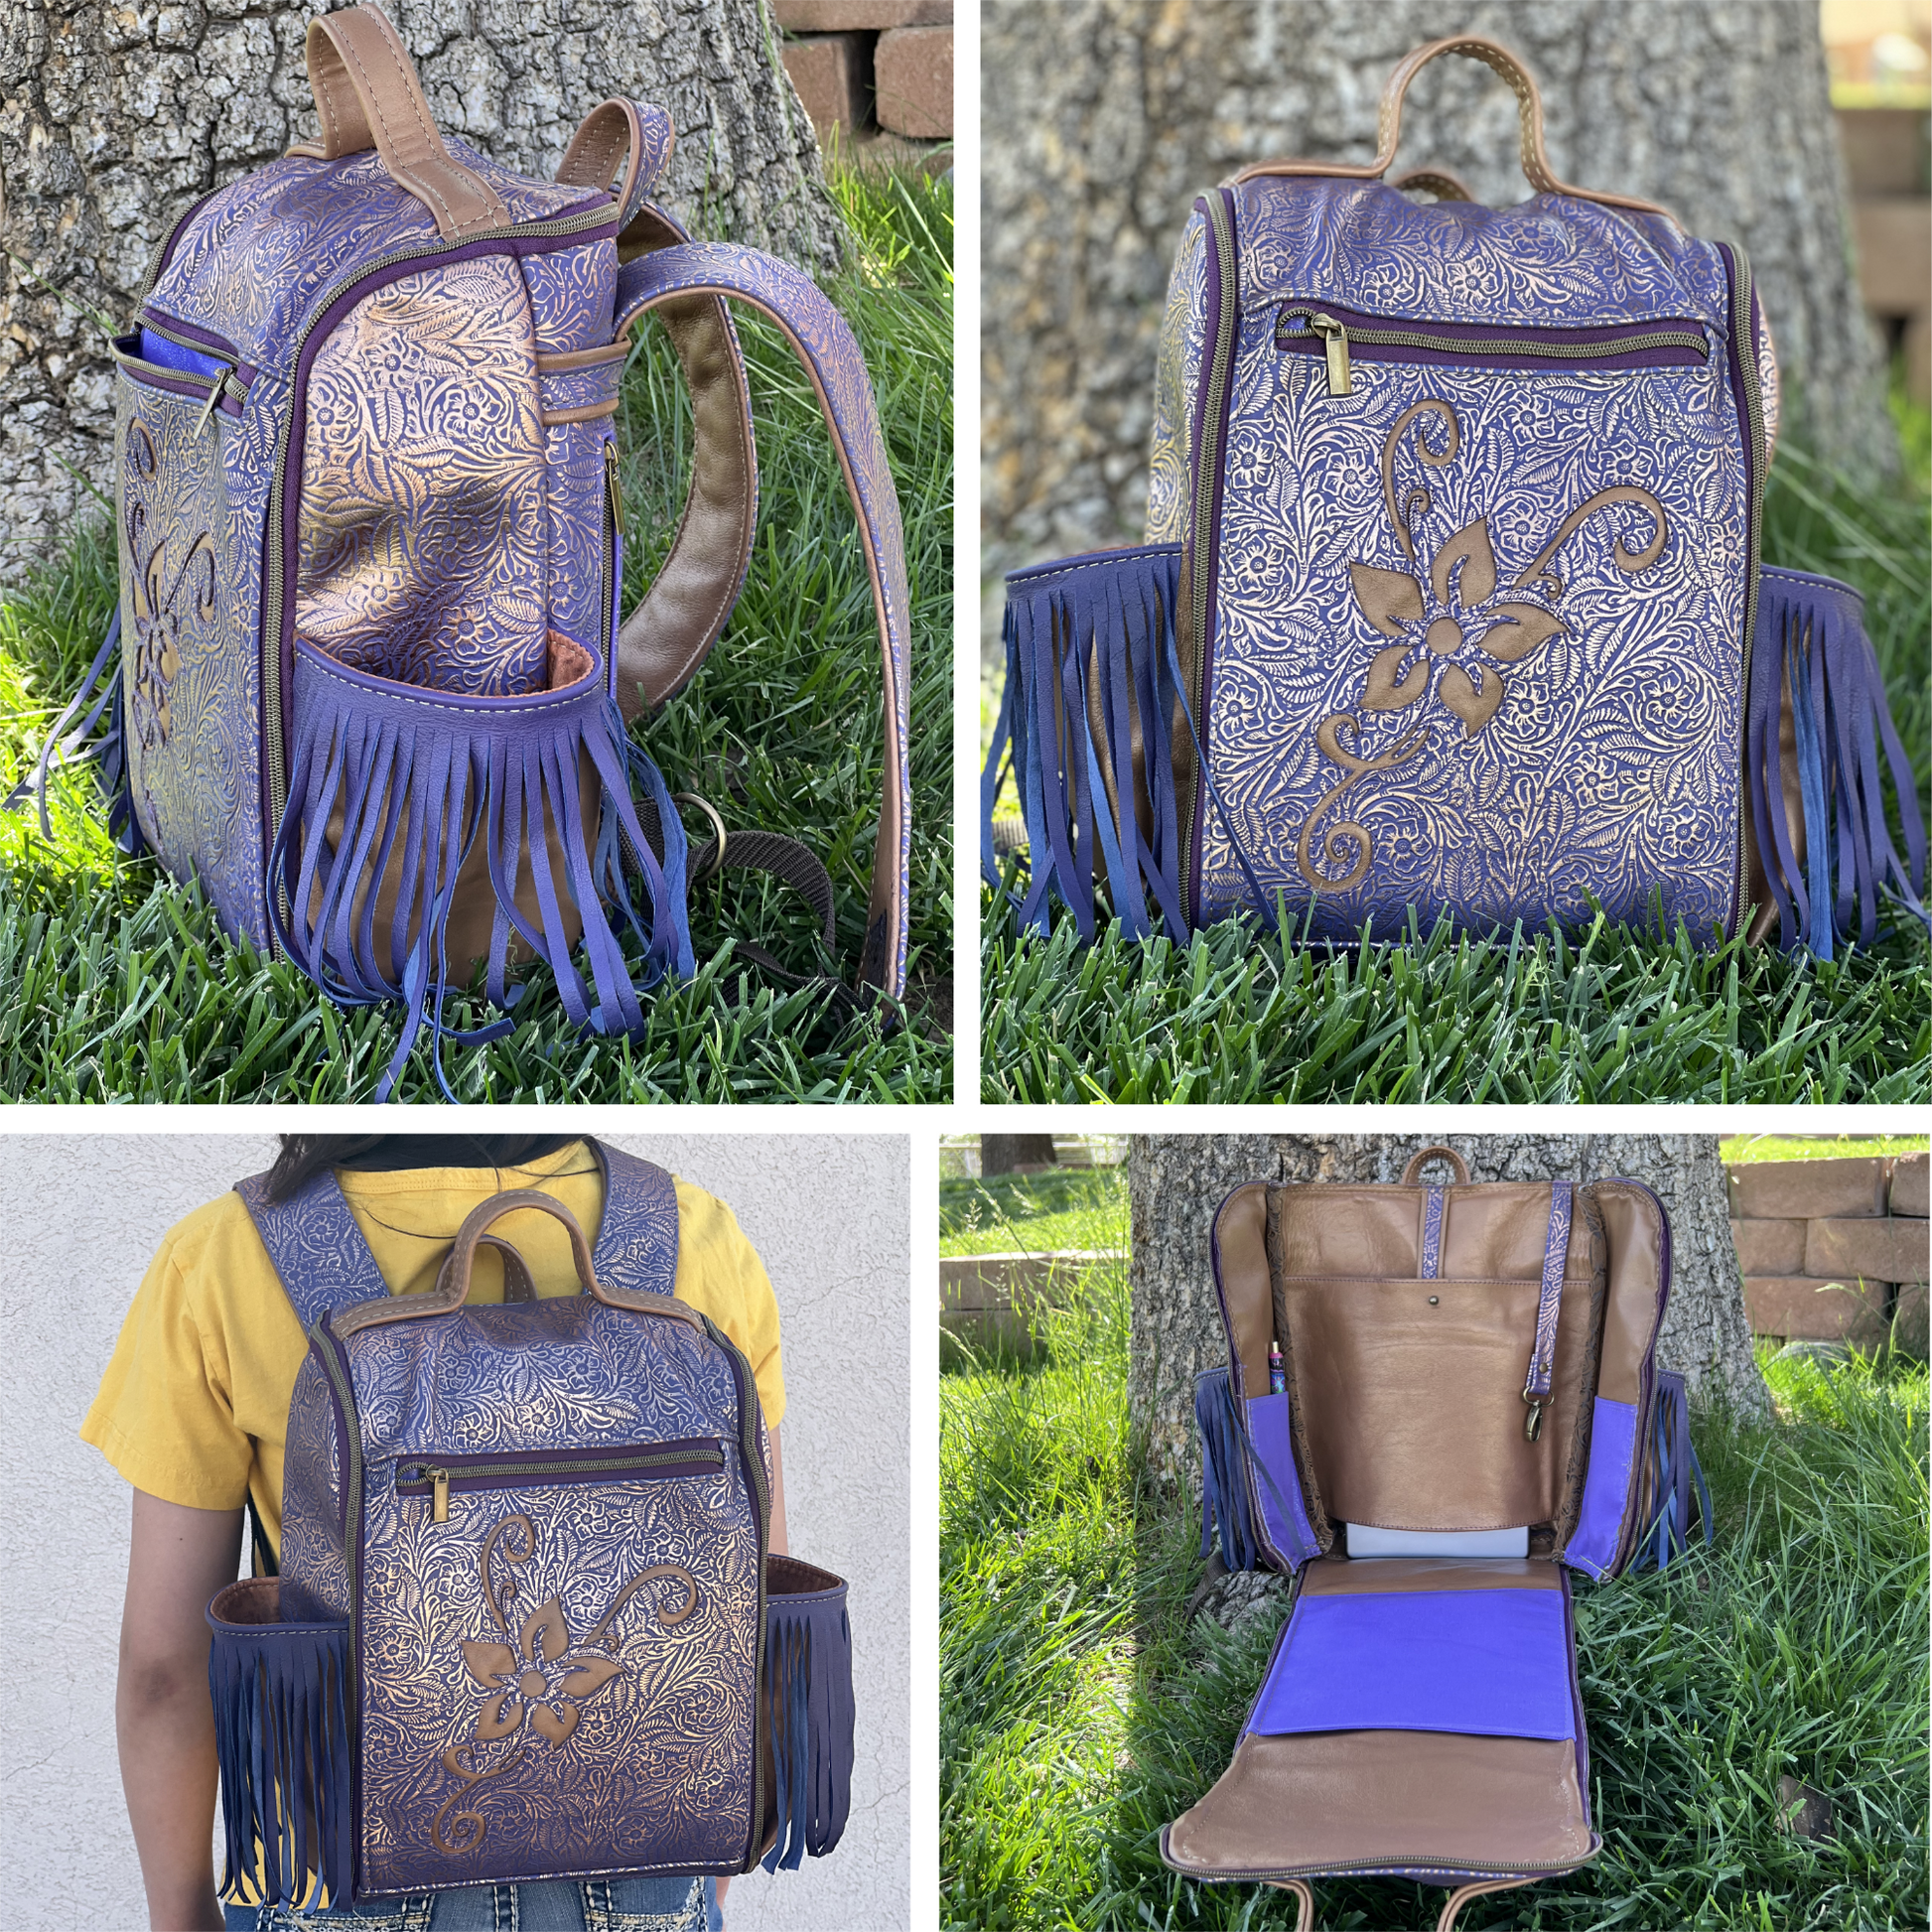 21+ Wonderful Picture of Backpack Sewing Pattern - figswoodfiredbistro.com